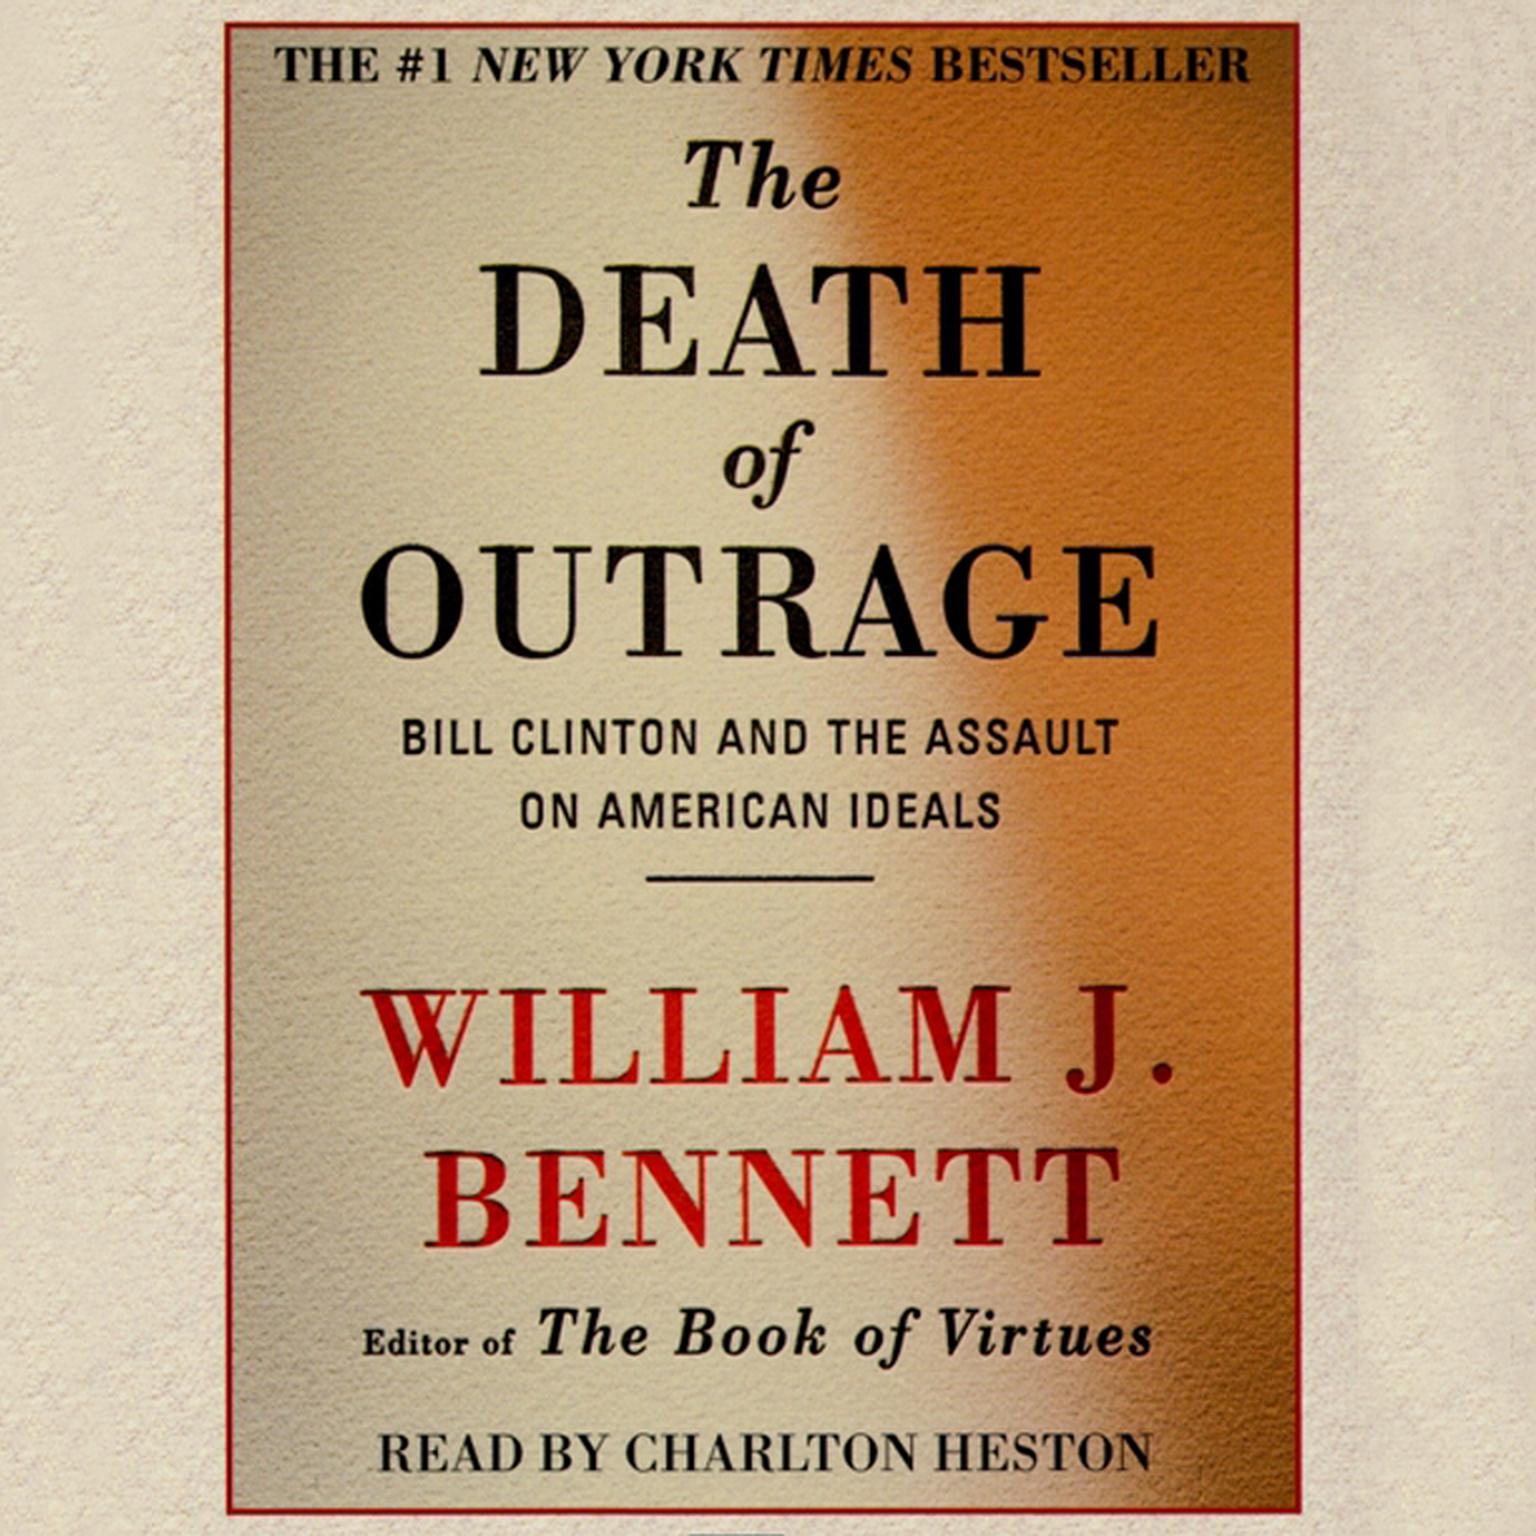 The Death of Outrage (Abridged): Bill Clinton and the Assault on American Ideals Audiobook, by William J. Bennett